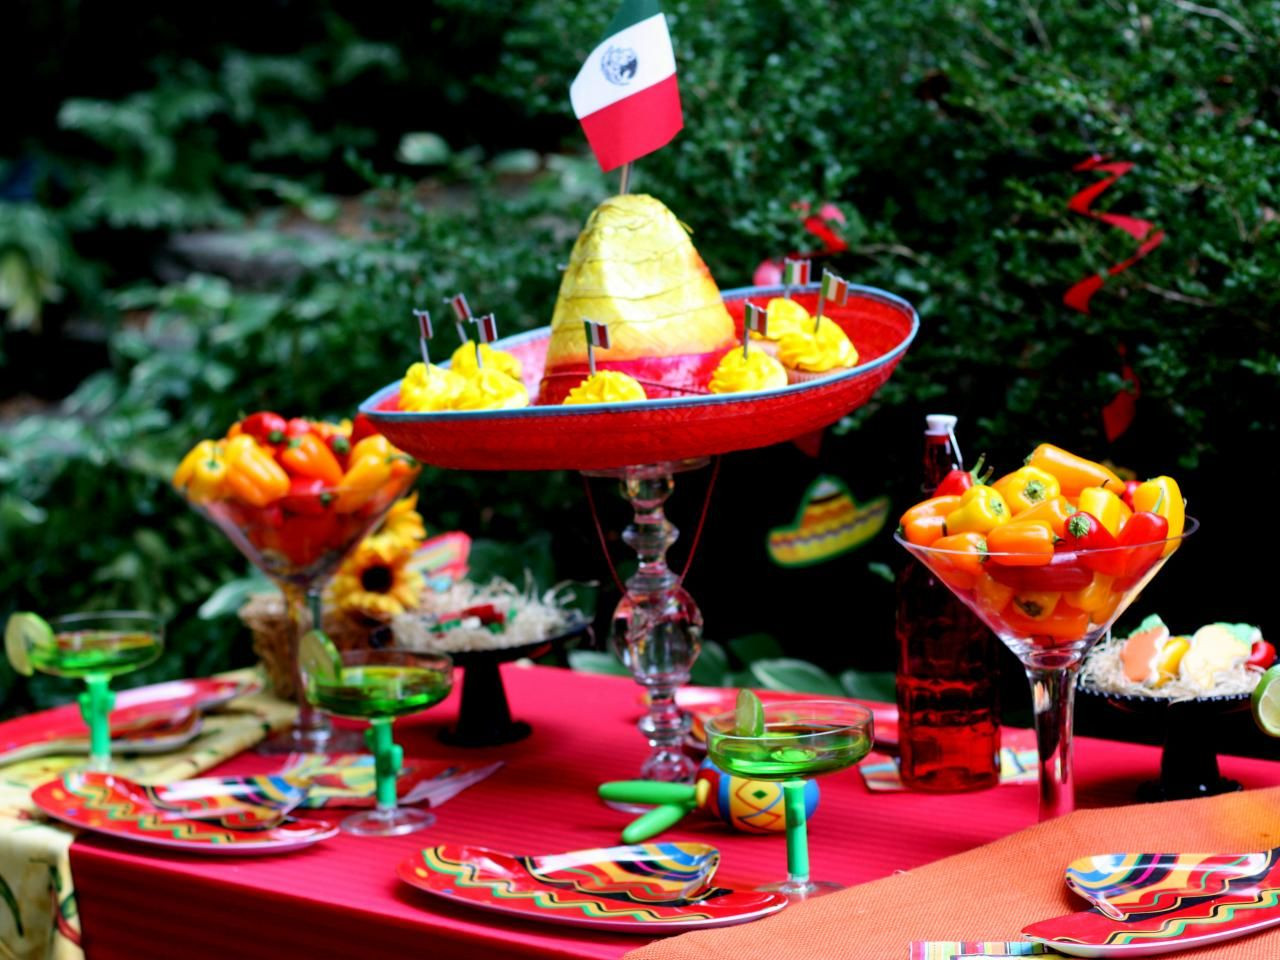 Summer Party Decoration Ideas
 Sizzling Themes for an Outdoor Summer Party